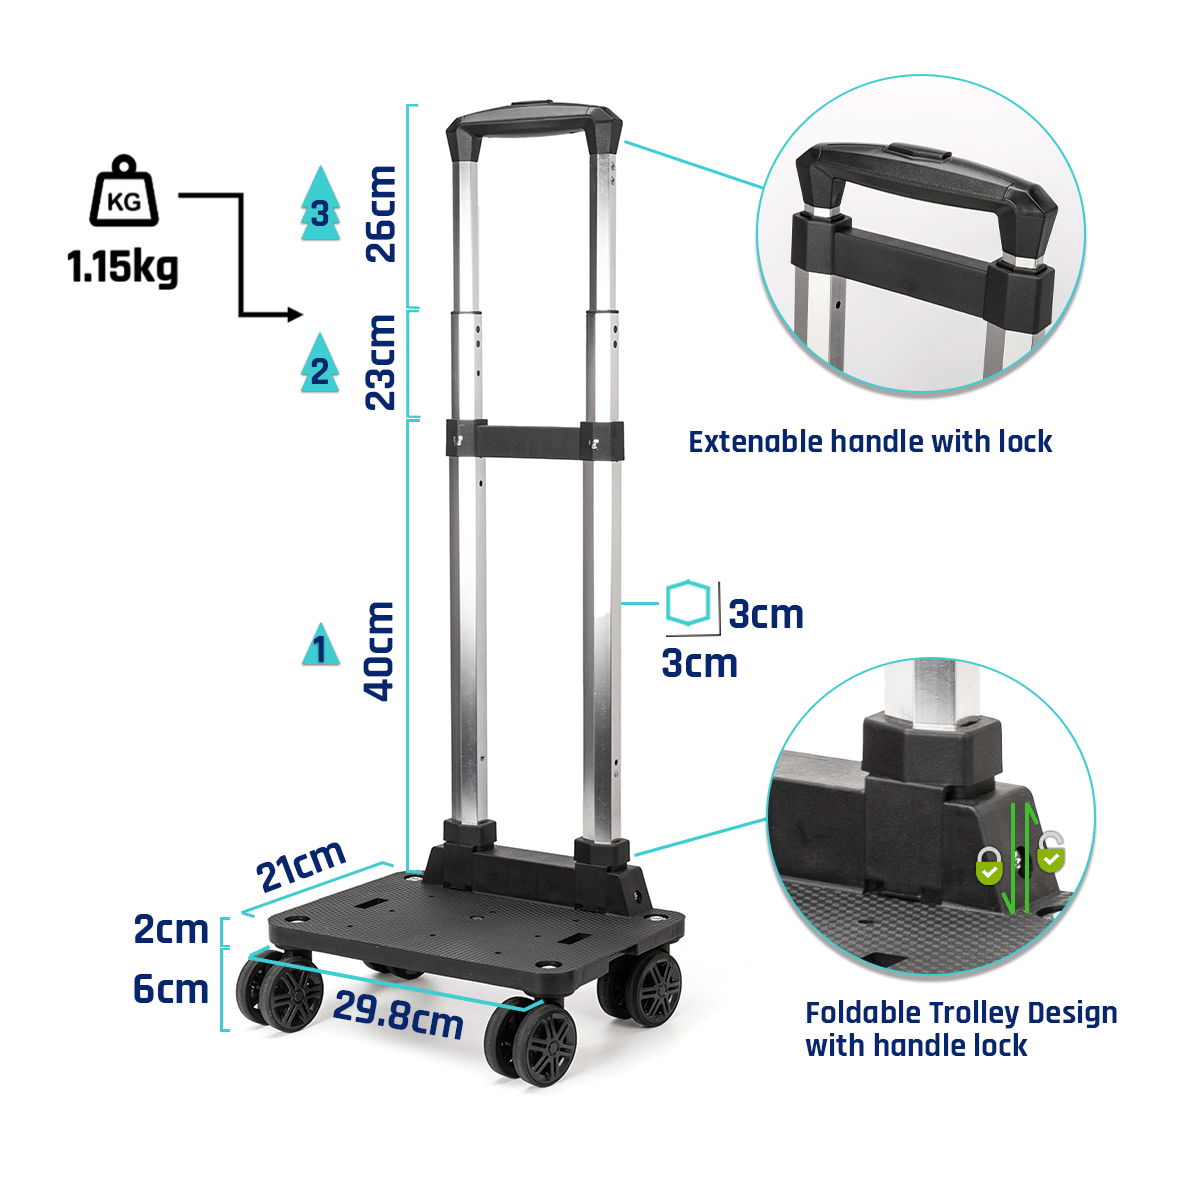 IMPACT - IP-2300 - Impact Ergo-Comfort Spinal Support Detachable Trolley Backpack